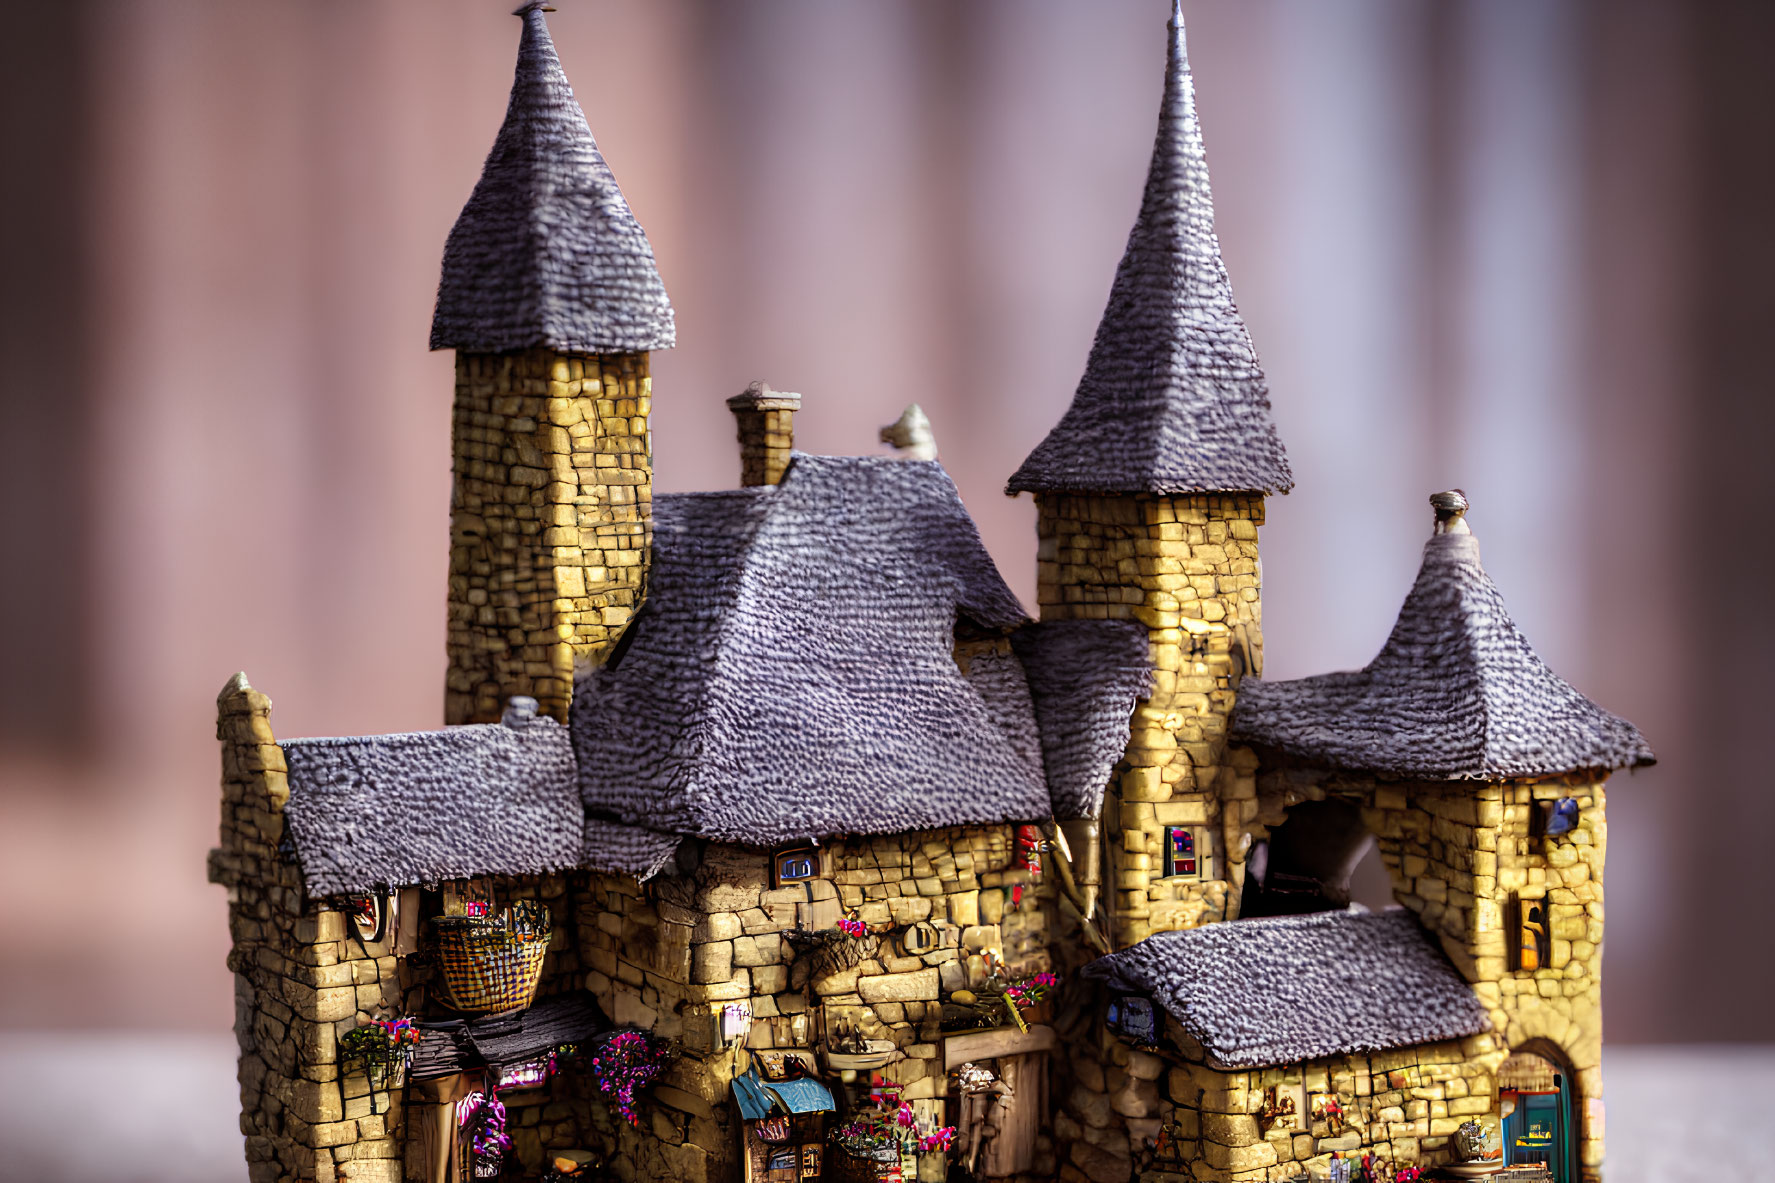 Detailed Miniature Fairy Tale Castle with Pointed Roofs and Stonework against Flowered Background